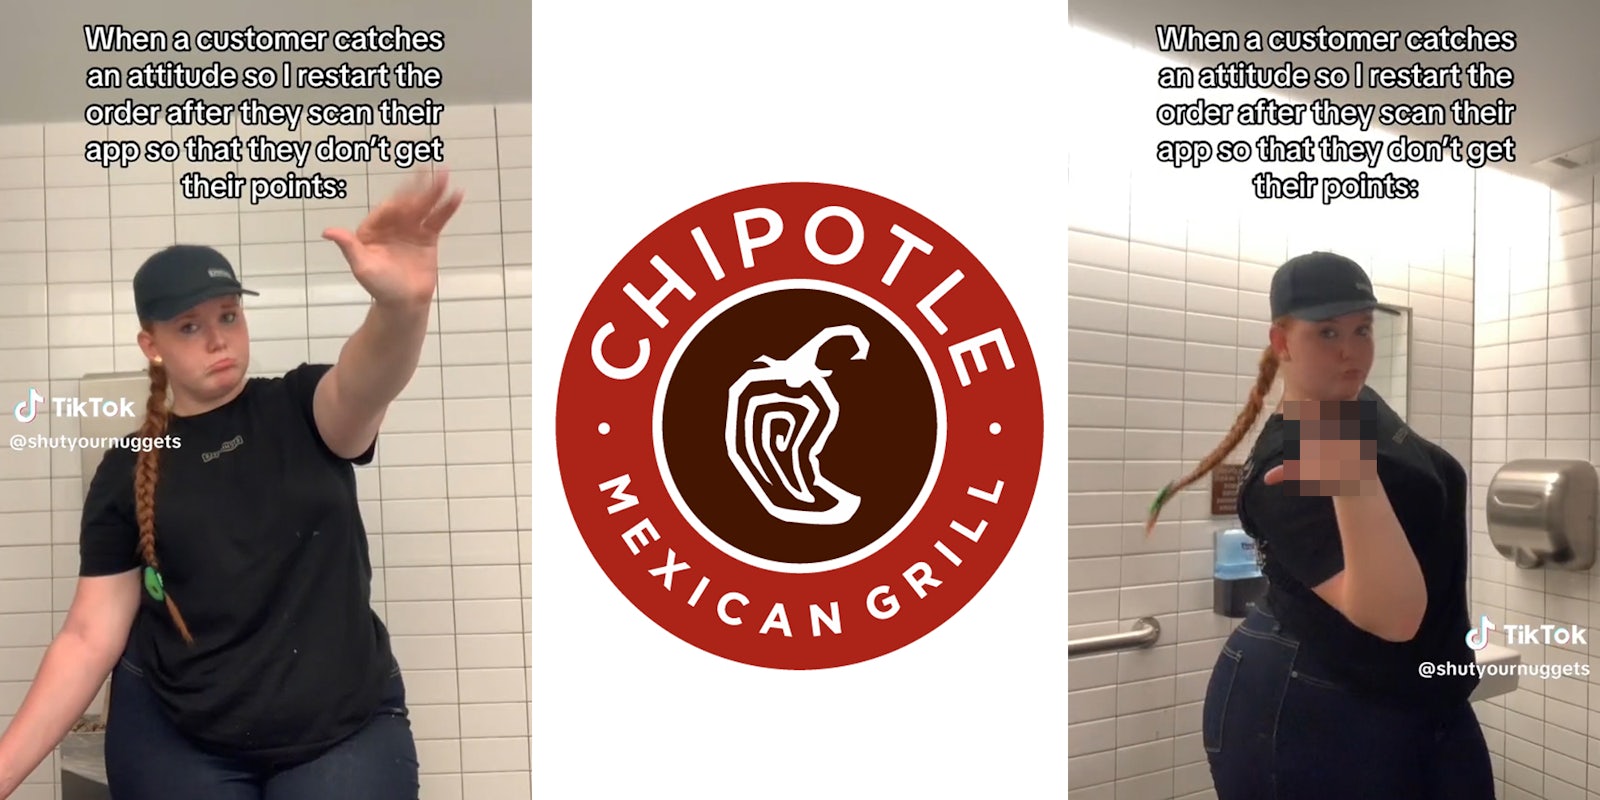 chipotle employee in bathroom with caption 'When a customer catches an attitude so I restart the order after they scan their app so that they don't get their points' (l&r) Chipotle logo (c)